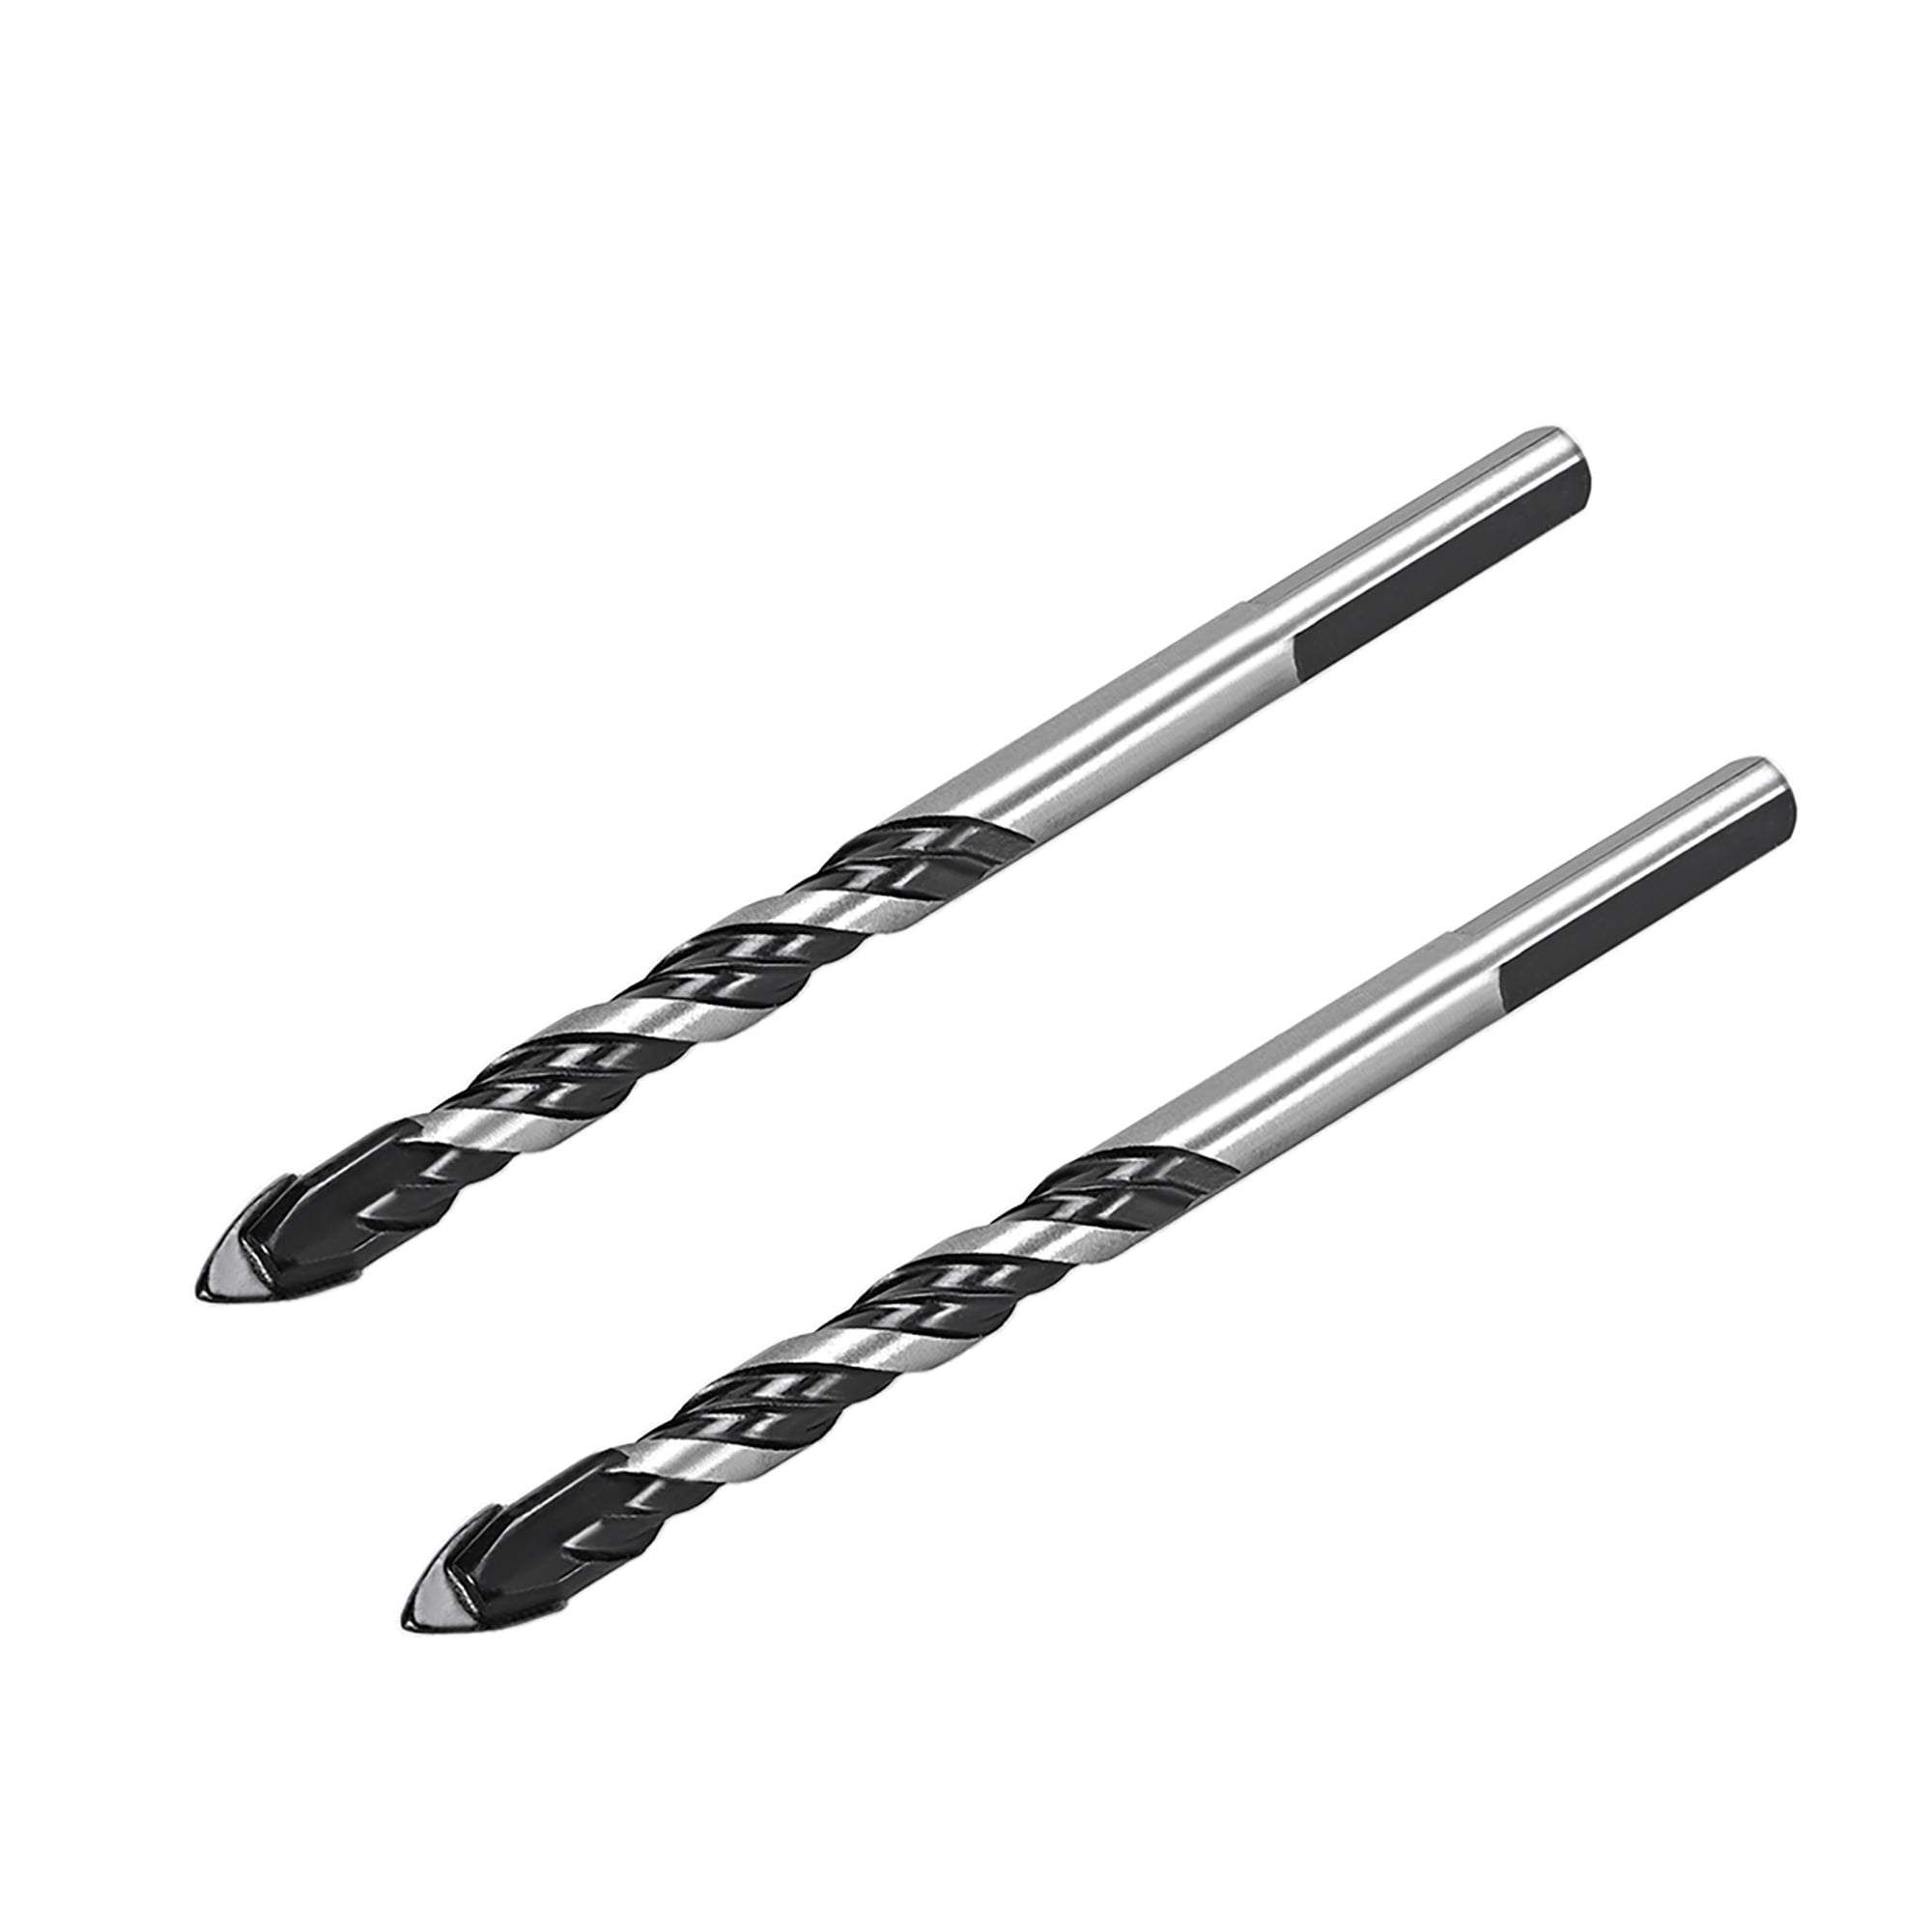 uxcell 5 Pcs Straight 8mm Diameter Round Tip Steel CNC Pin Pilot Punch 